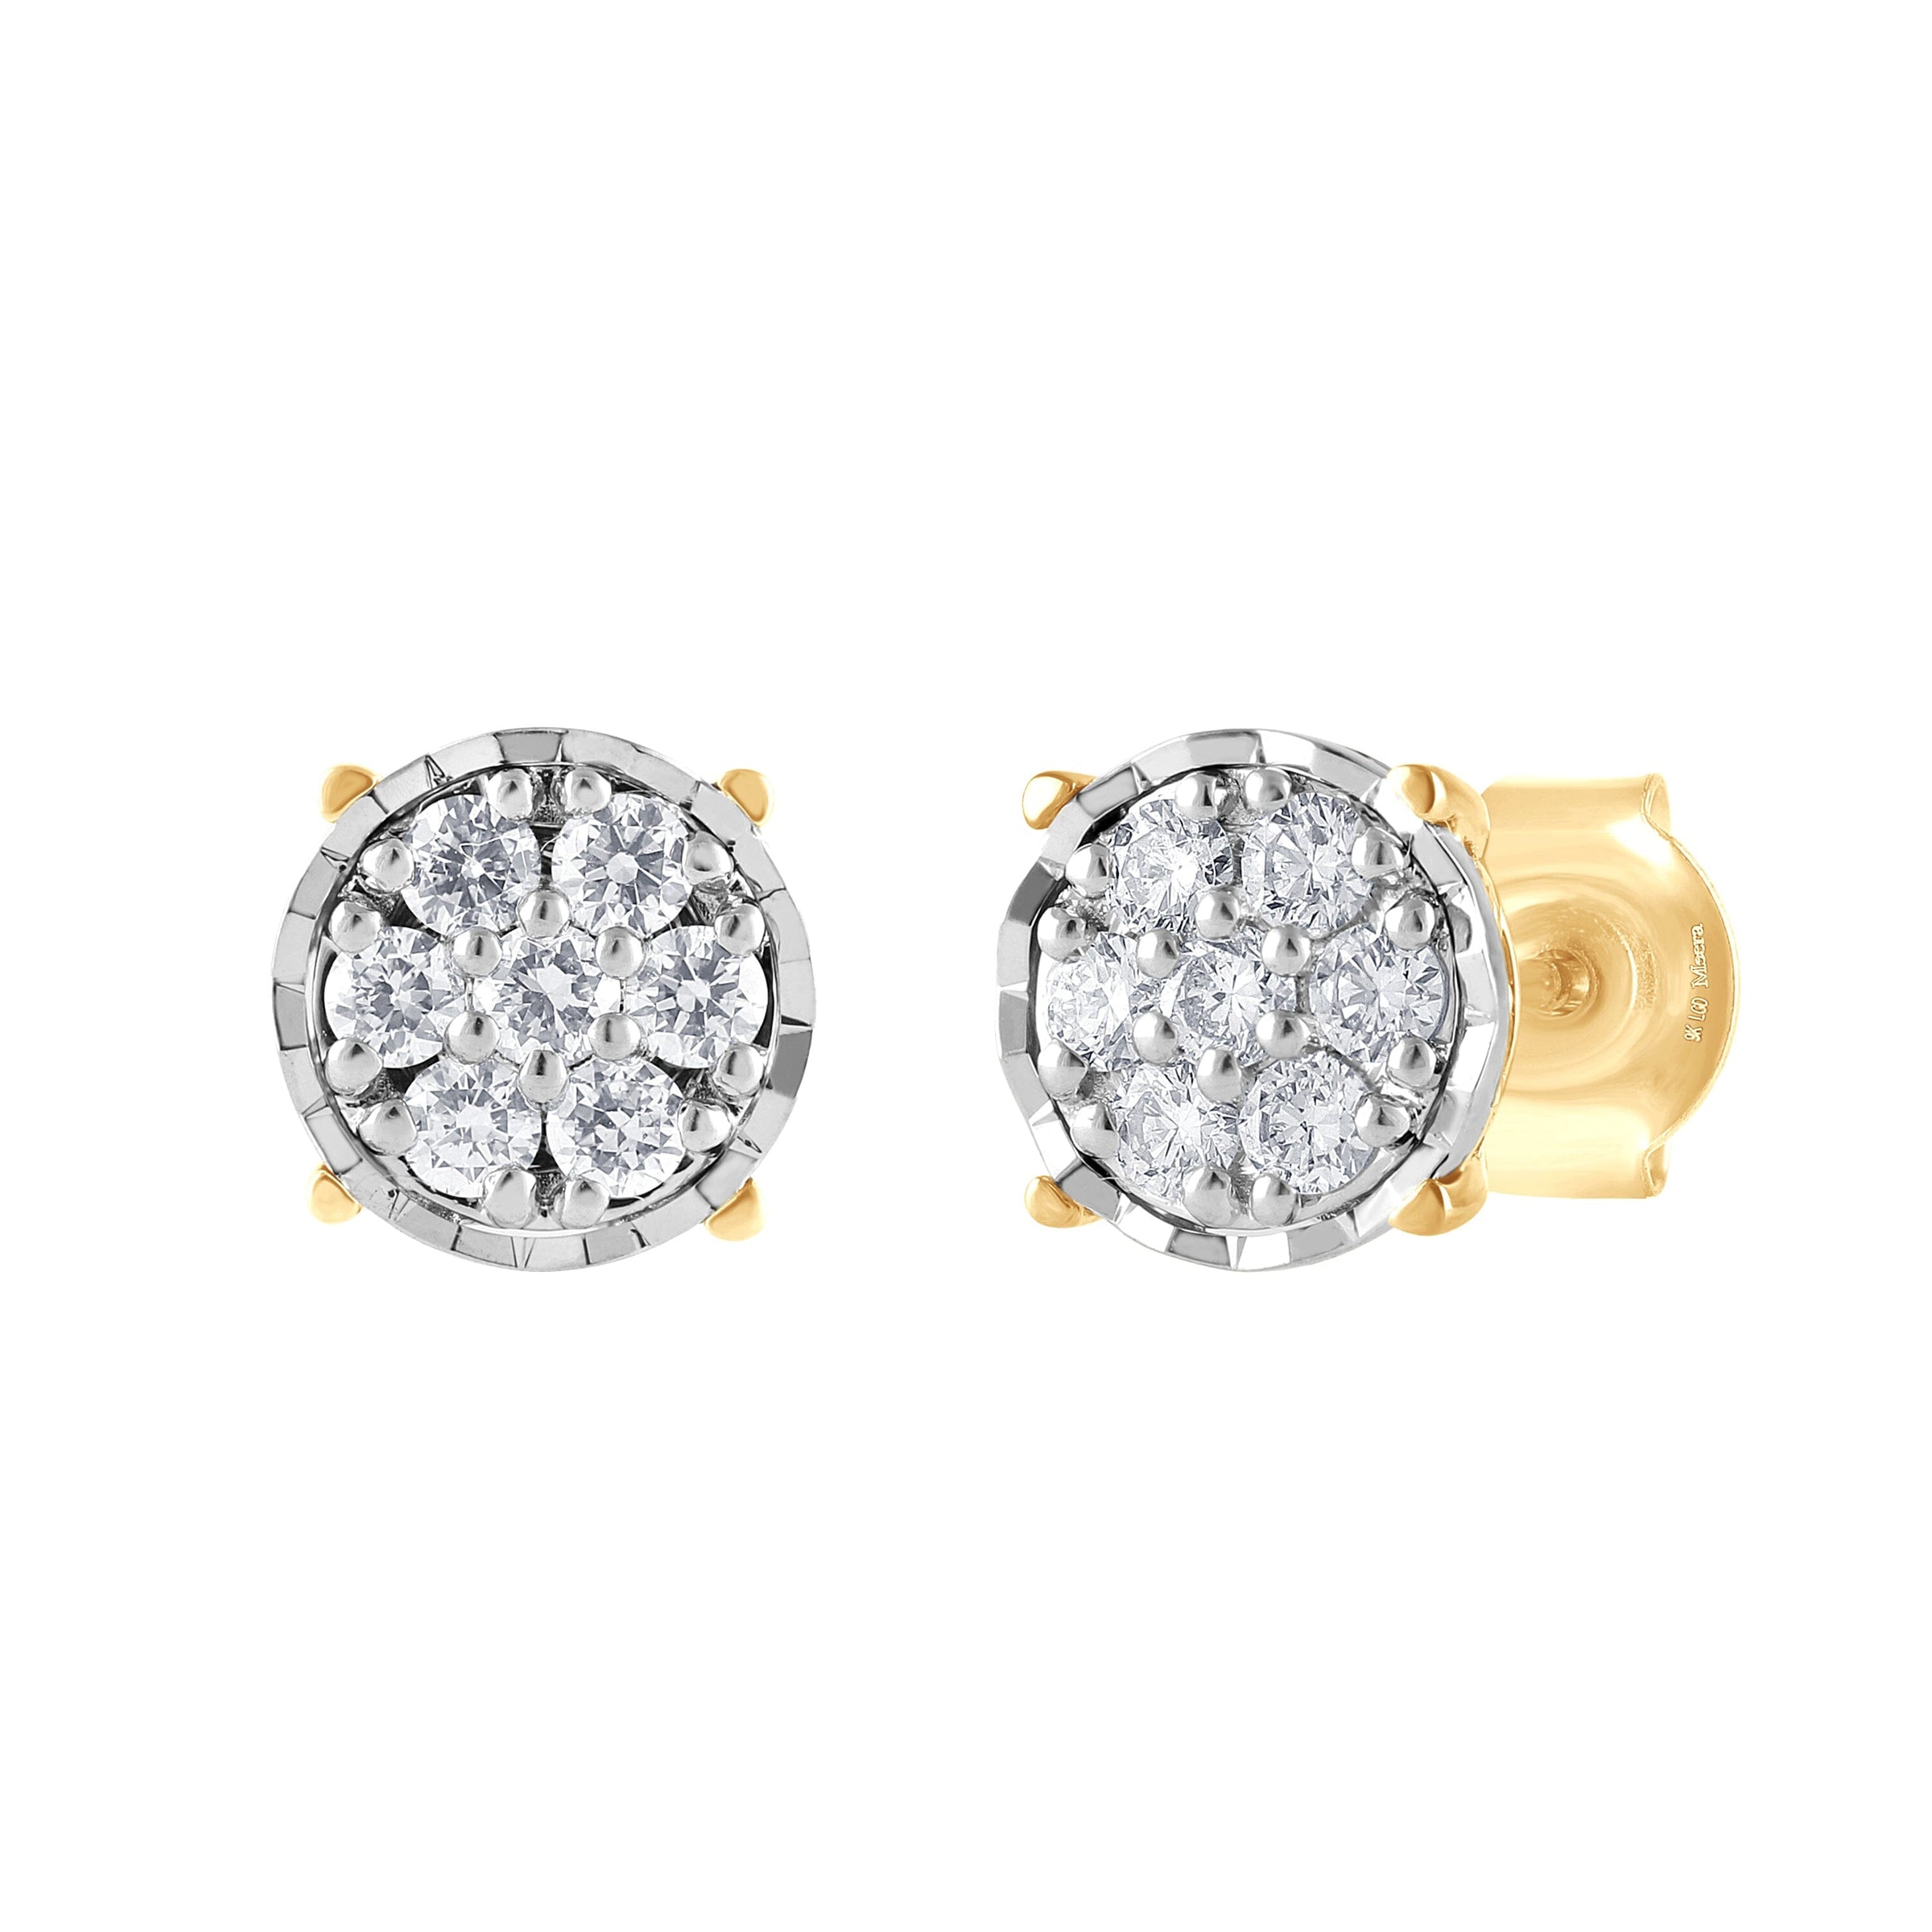 Meera Flower Composite Earrings with 1/3ct of Laboratory Grown Diamonds in 9ct Yellow Gold Earrings Bevilles 